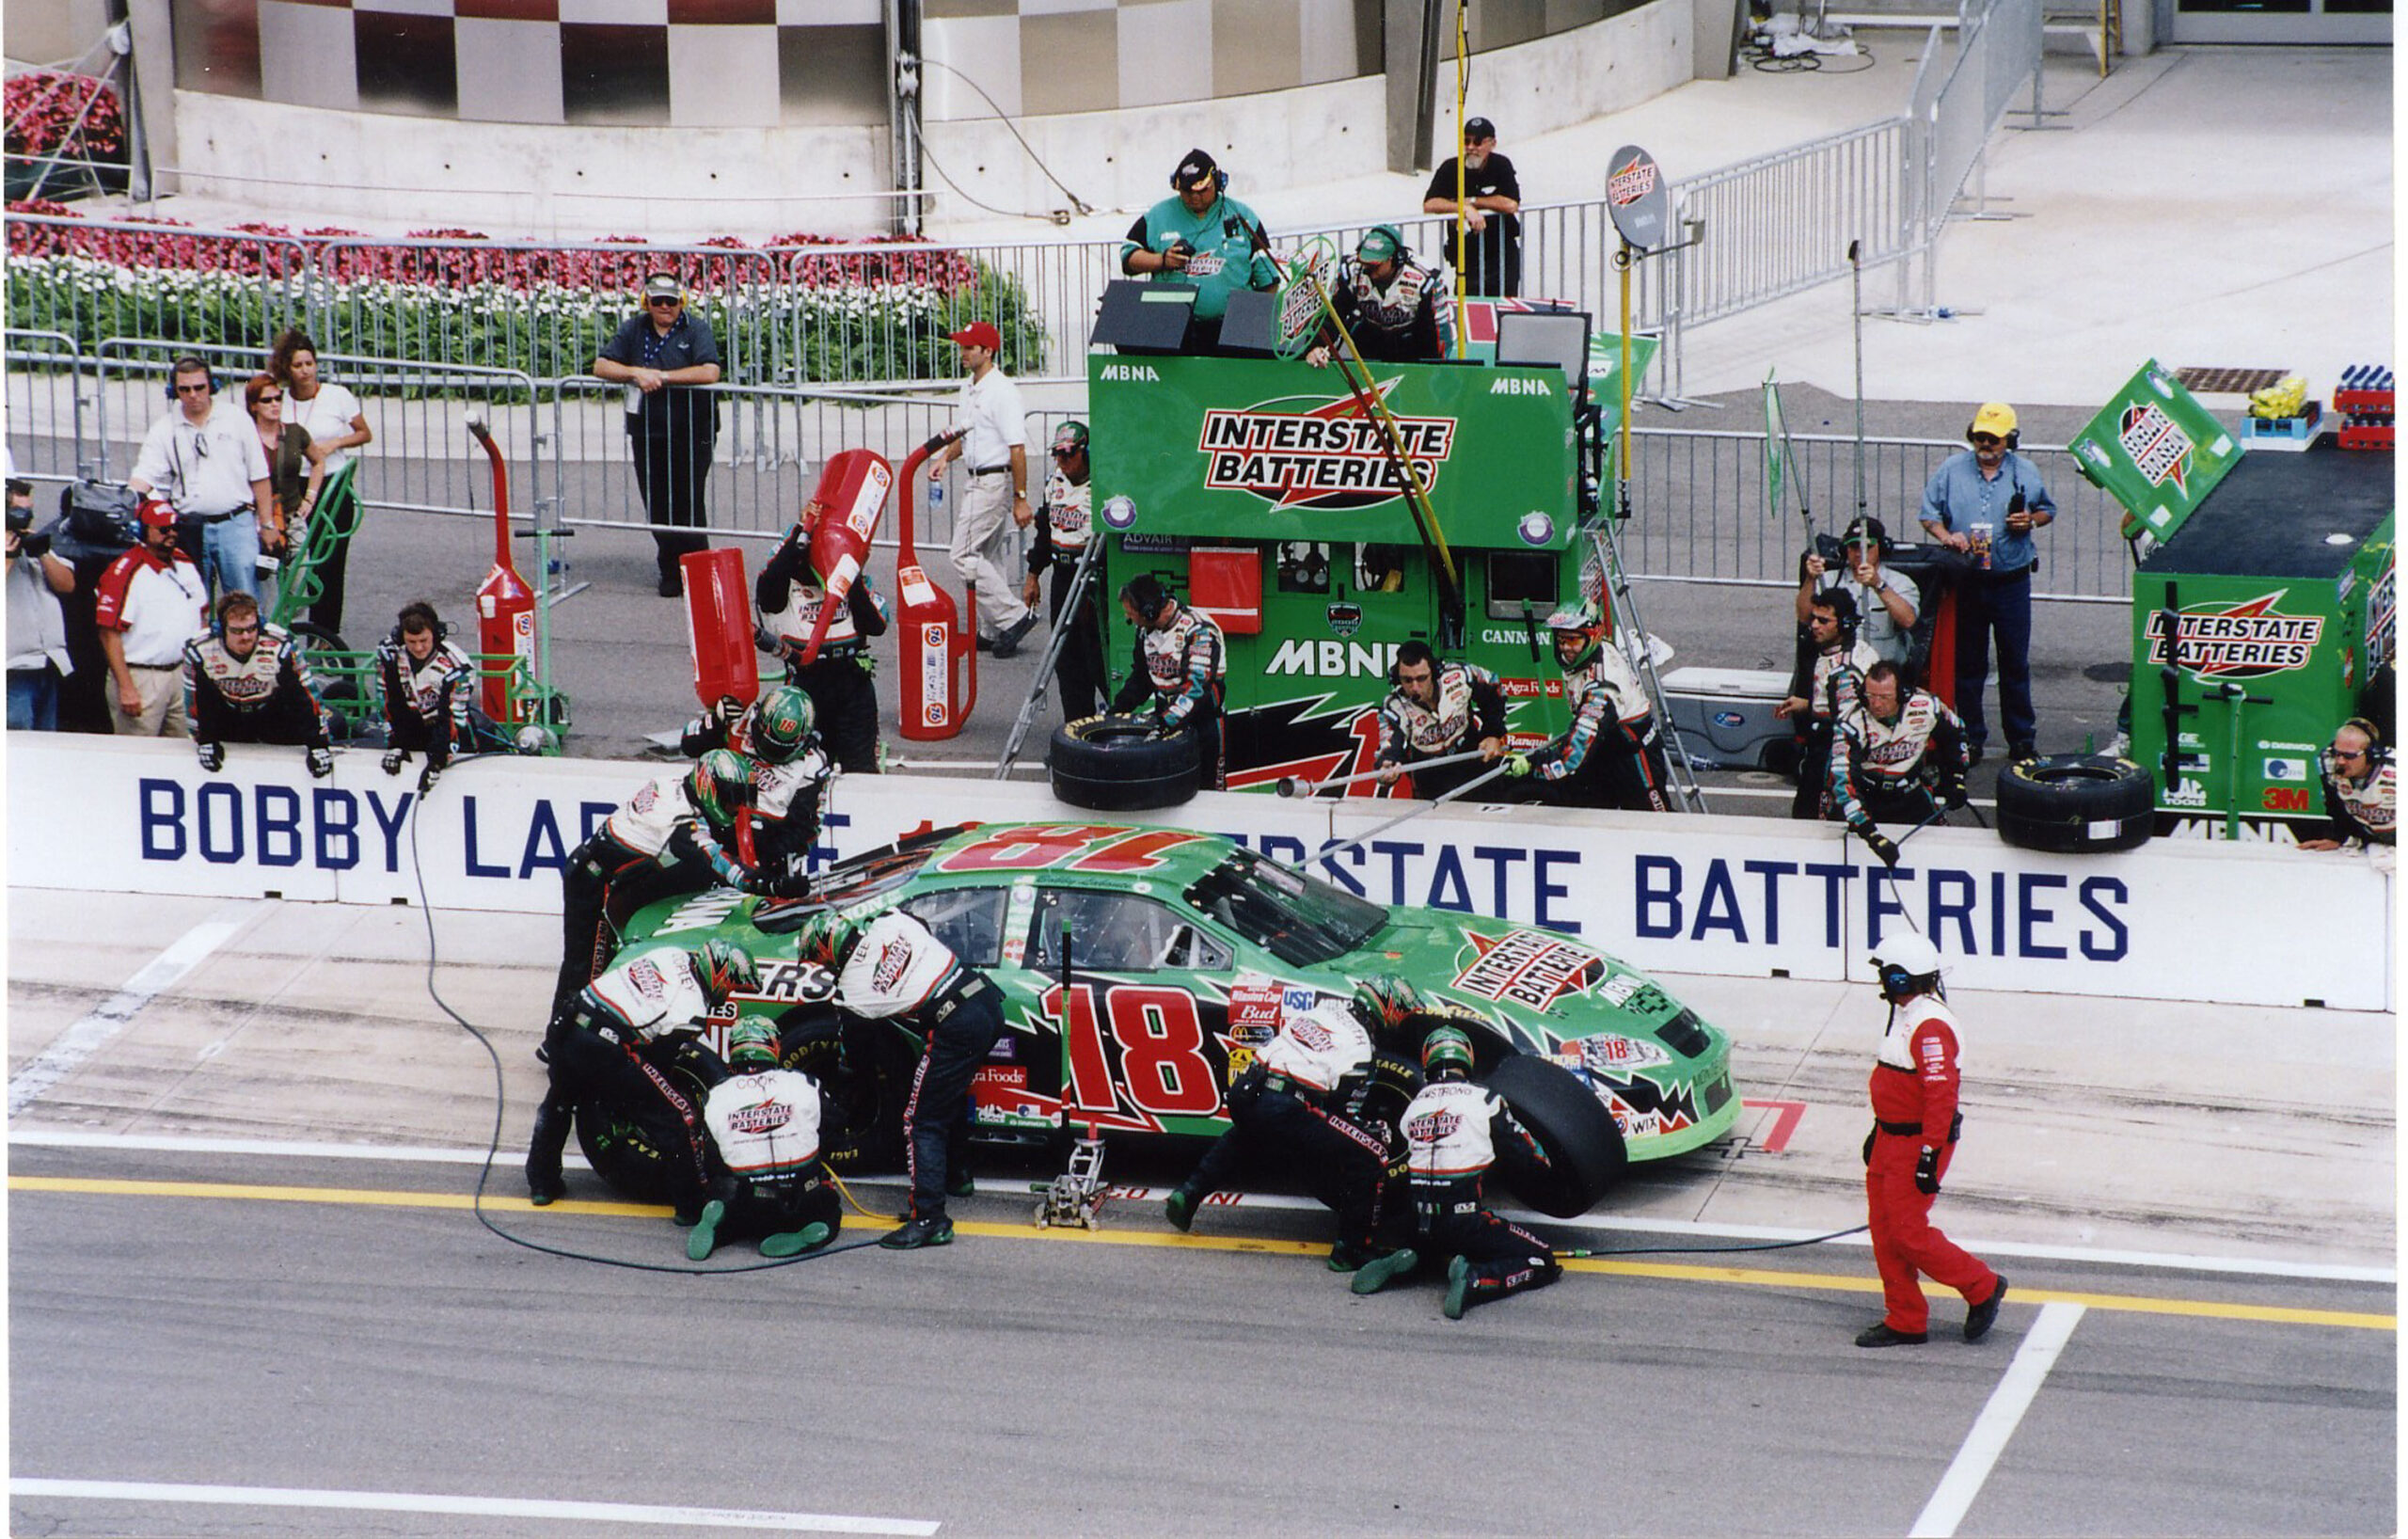 While Labonte has plentiful accolades from his Cup heydays, he's a race fan just like you. (Photo: Russ Garcia)